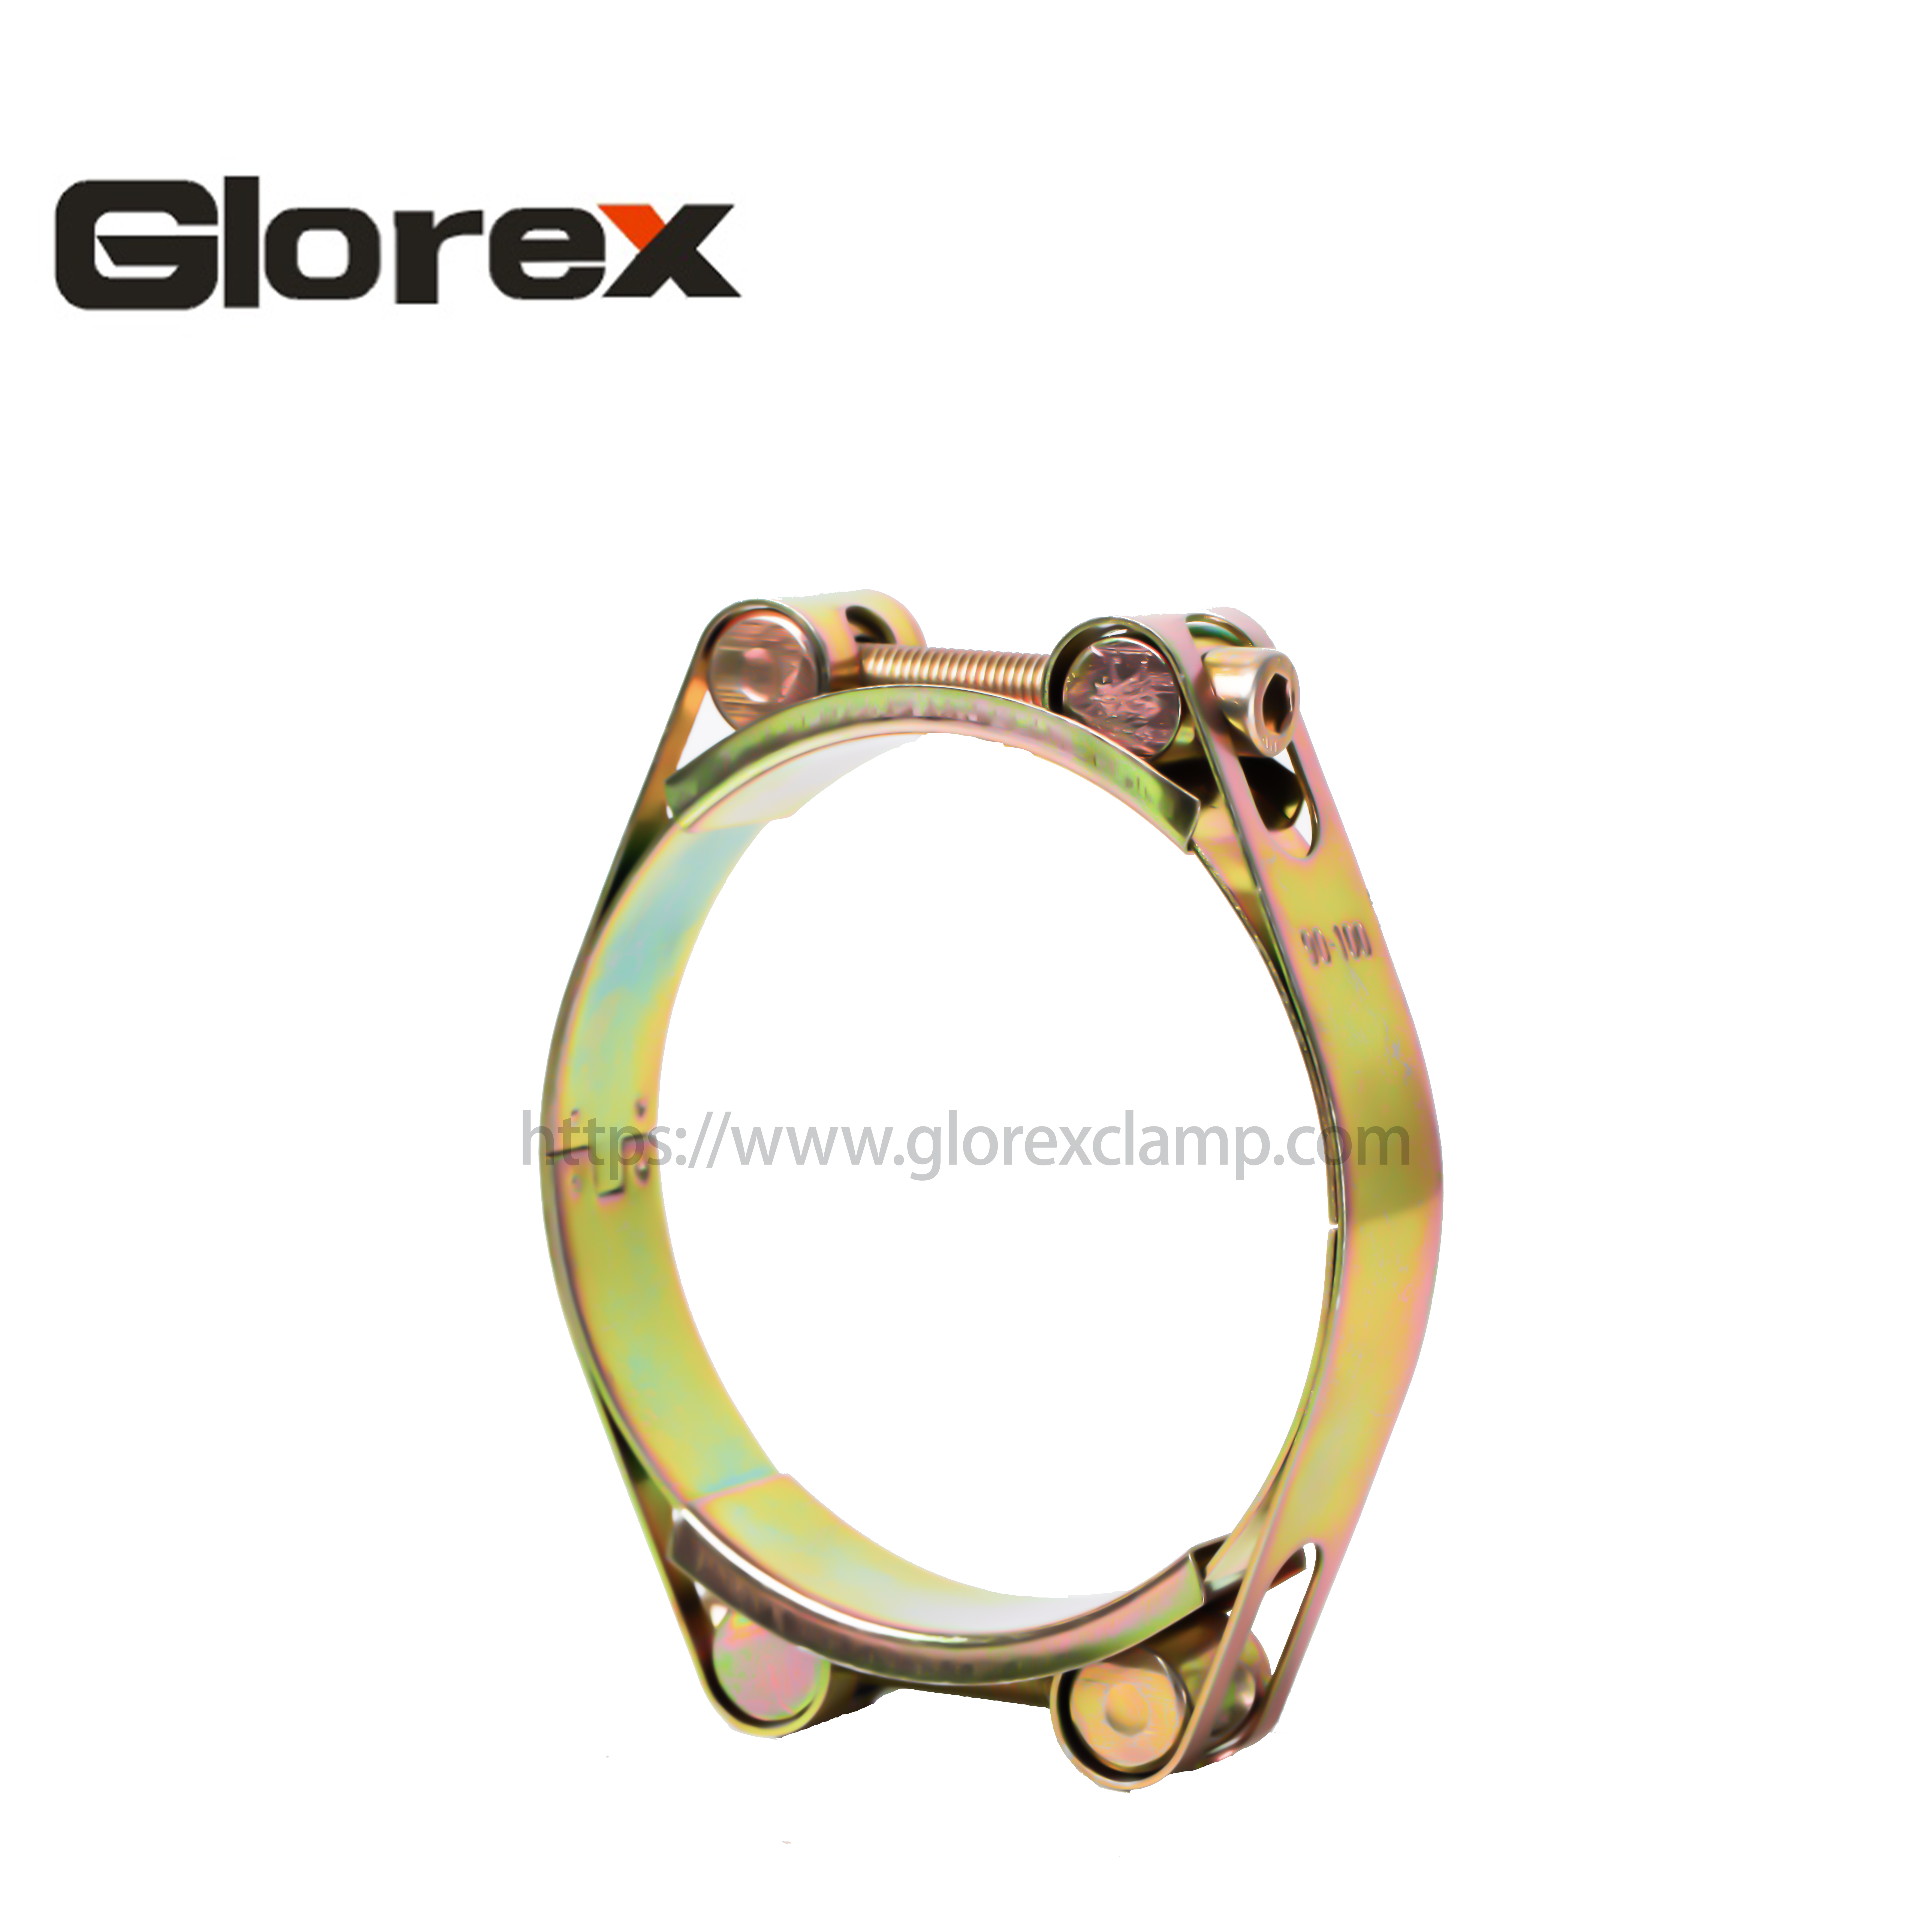 OEM/ODM China Wing Nut Hose Clamp - Robust clamp with double bolts – Glorex